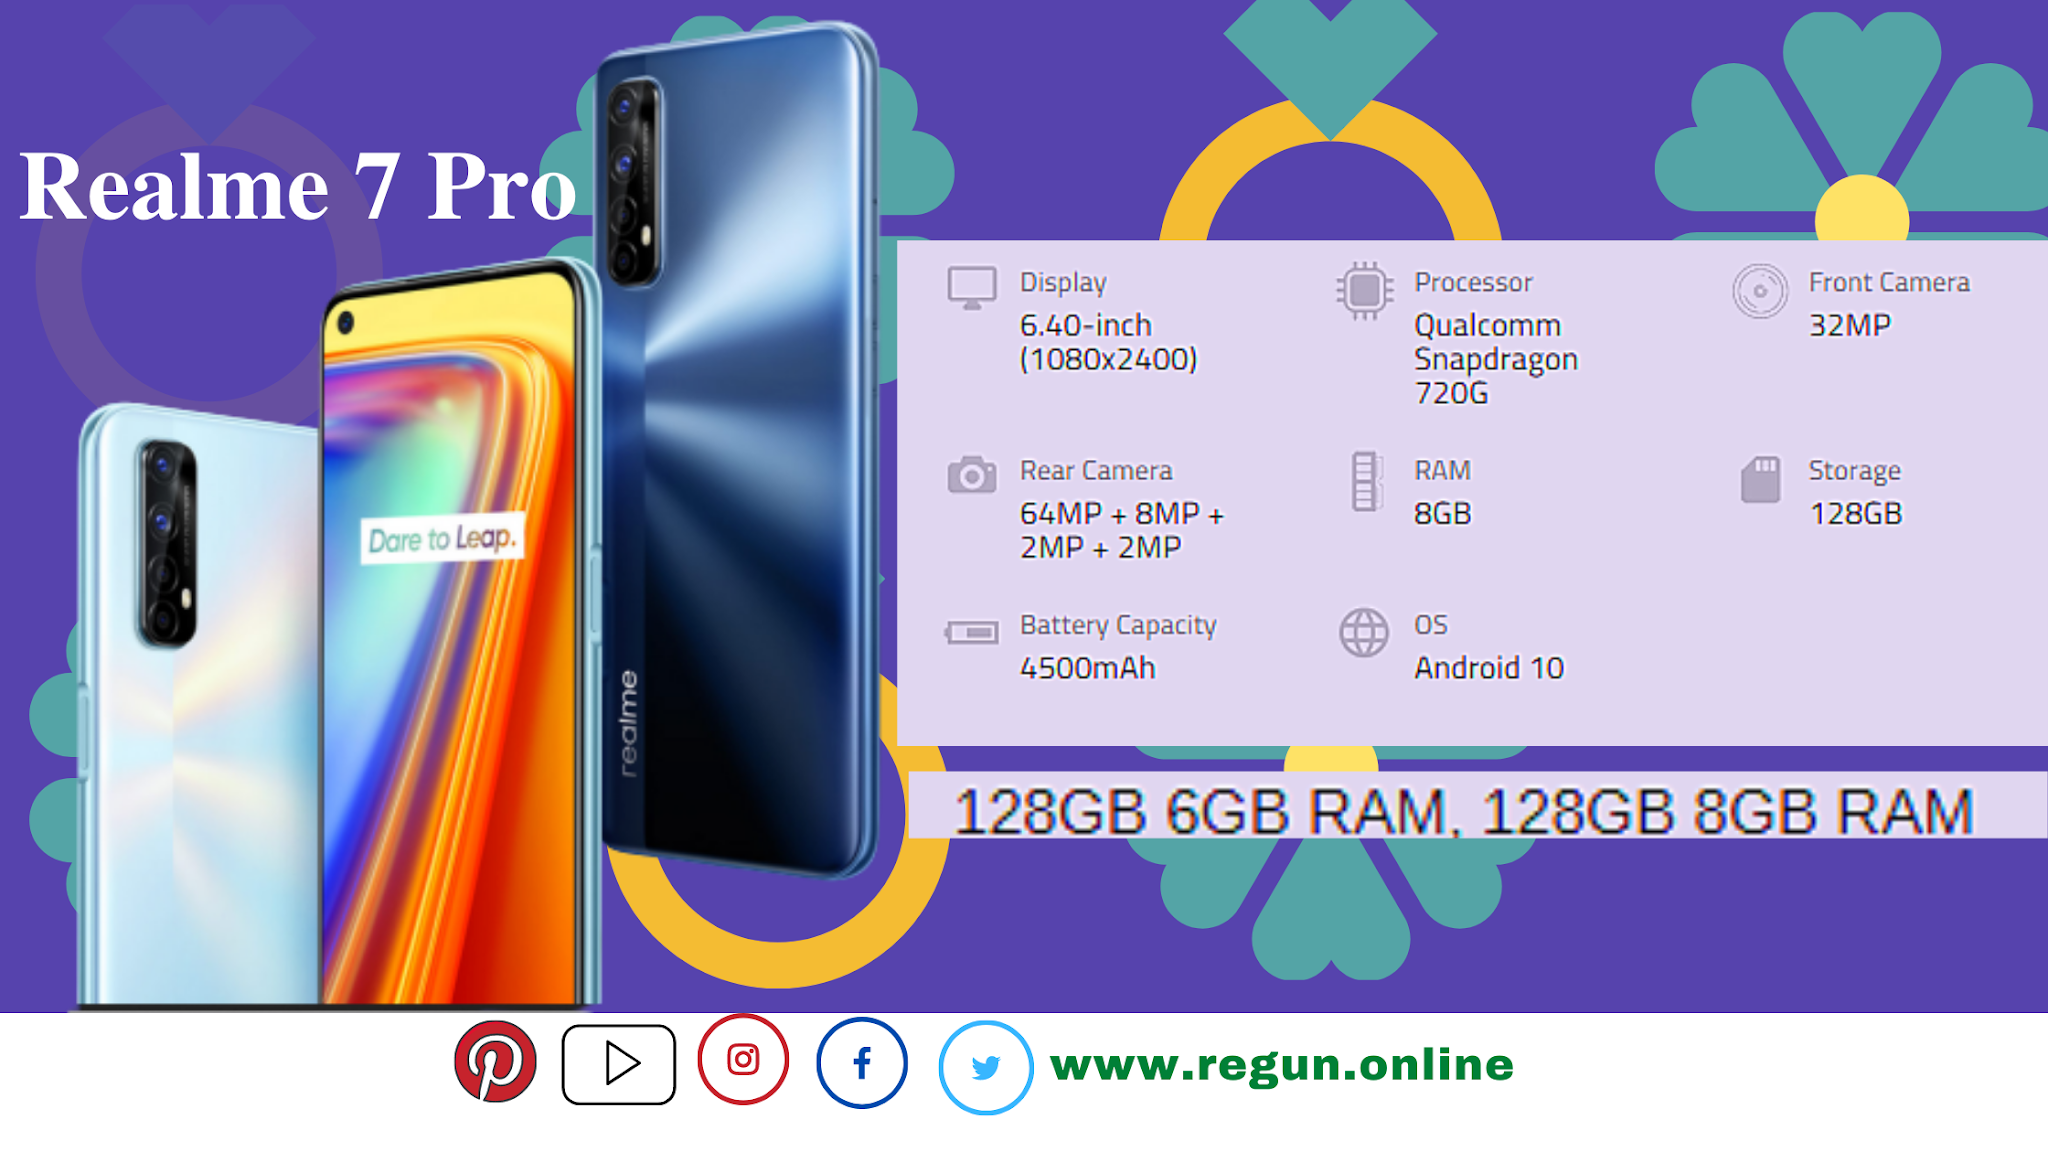 Realme 10 - Full phone specifications